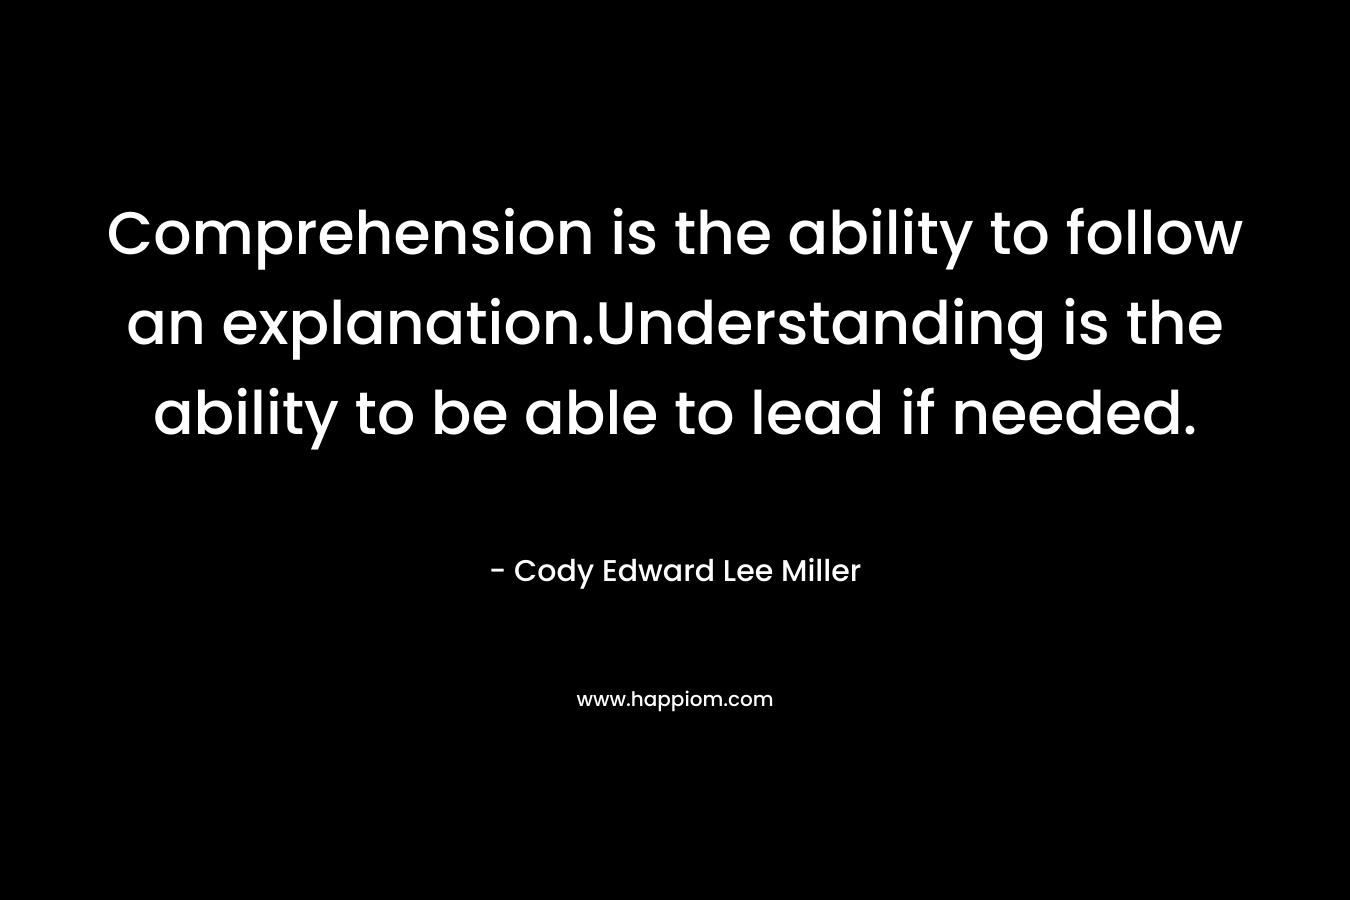 Comprehension is the ability to follow an explanation.Understanding is the ability to be able to lead if needed.